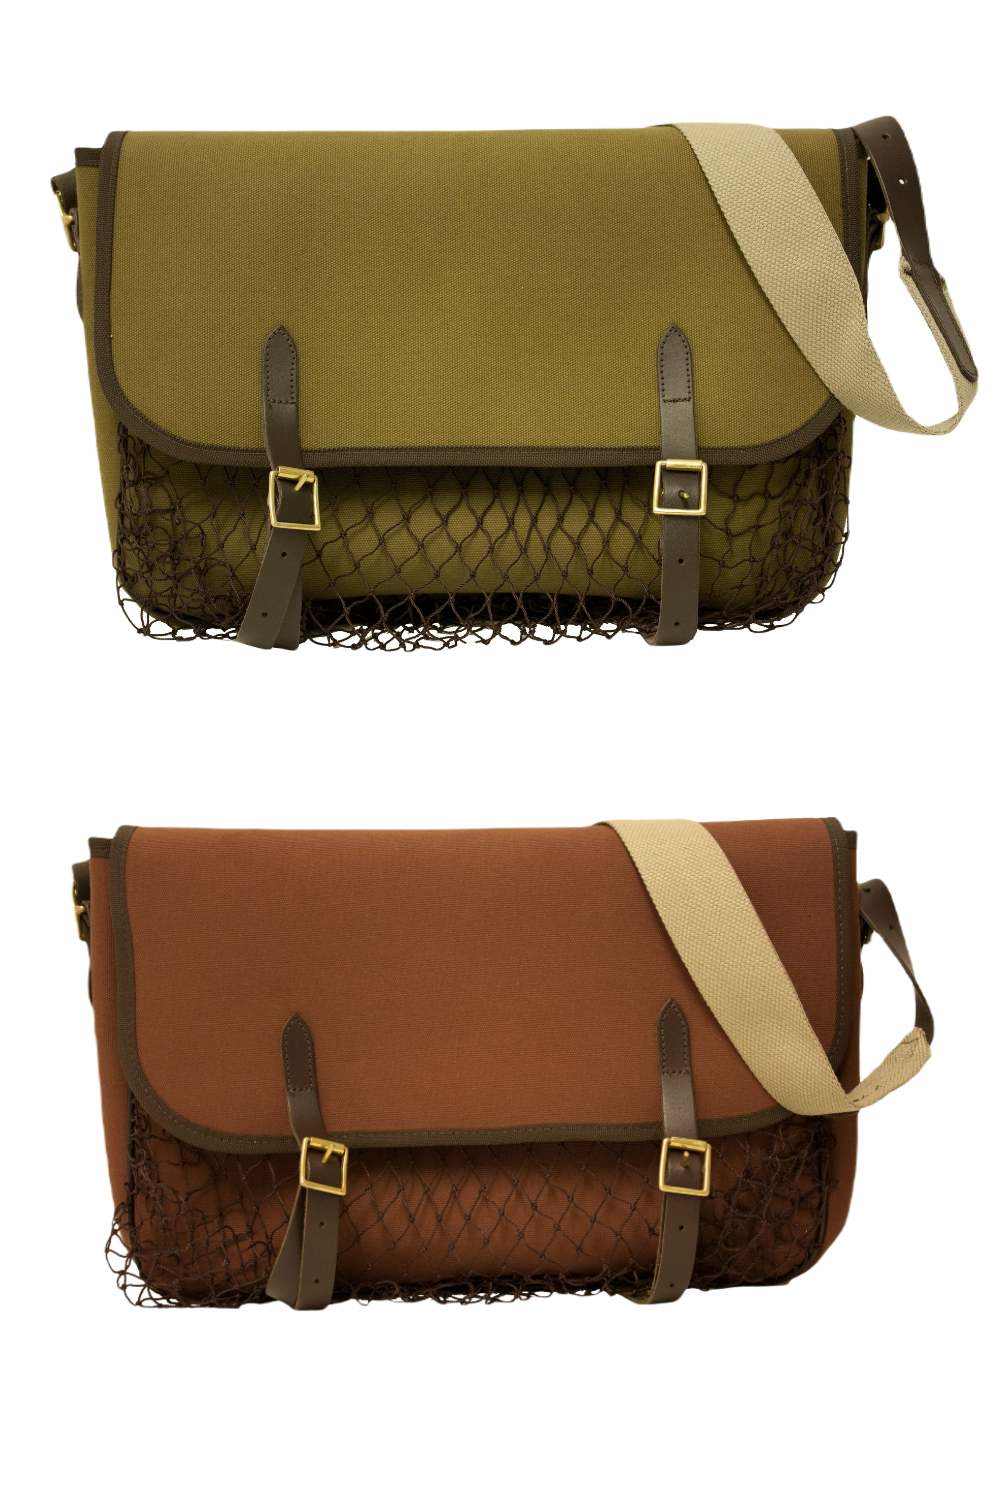 Bisley Canvas Game Bag In Green and Fox